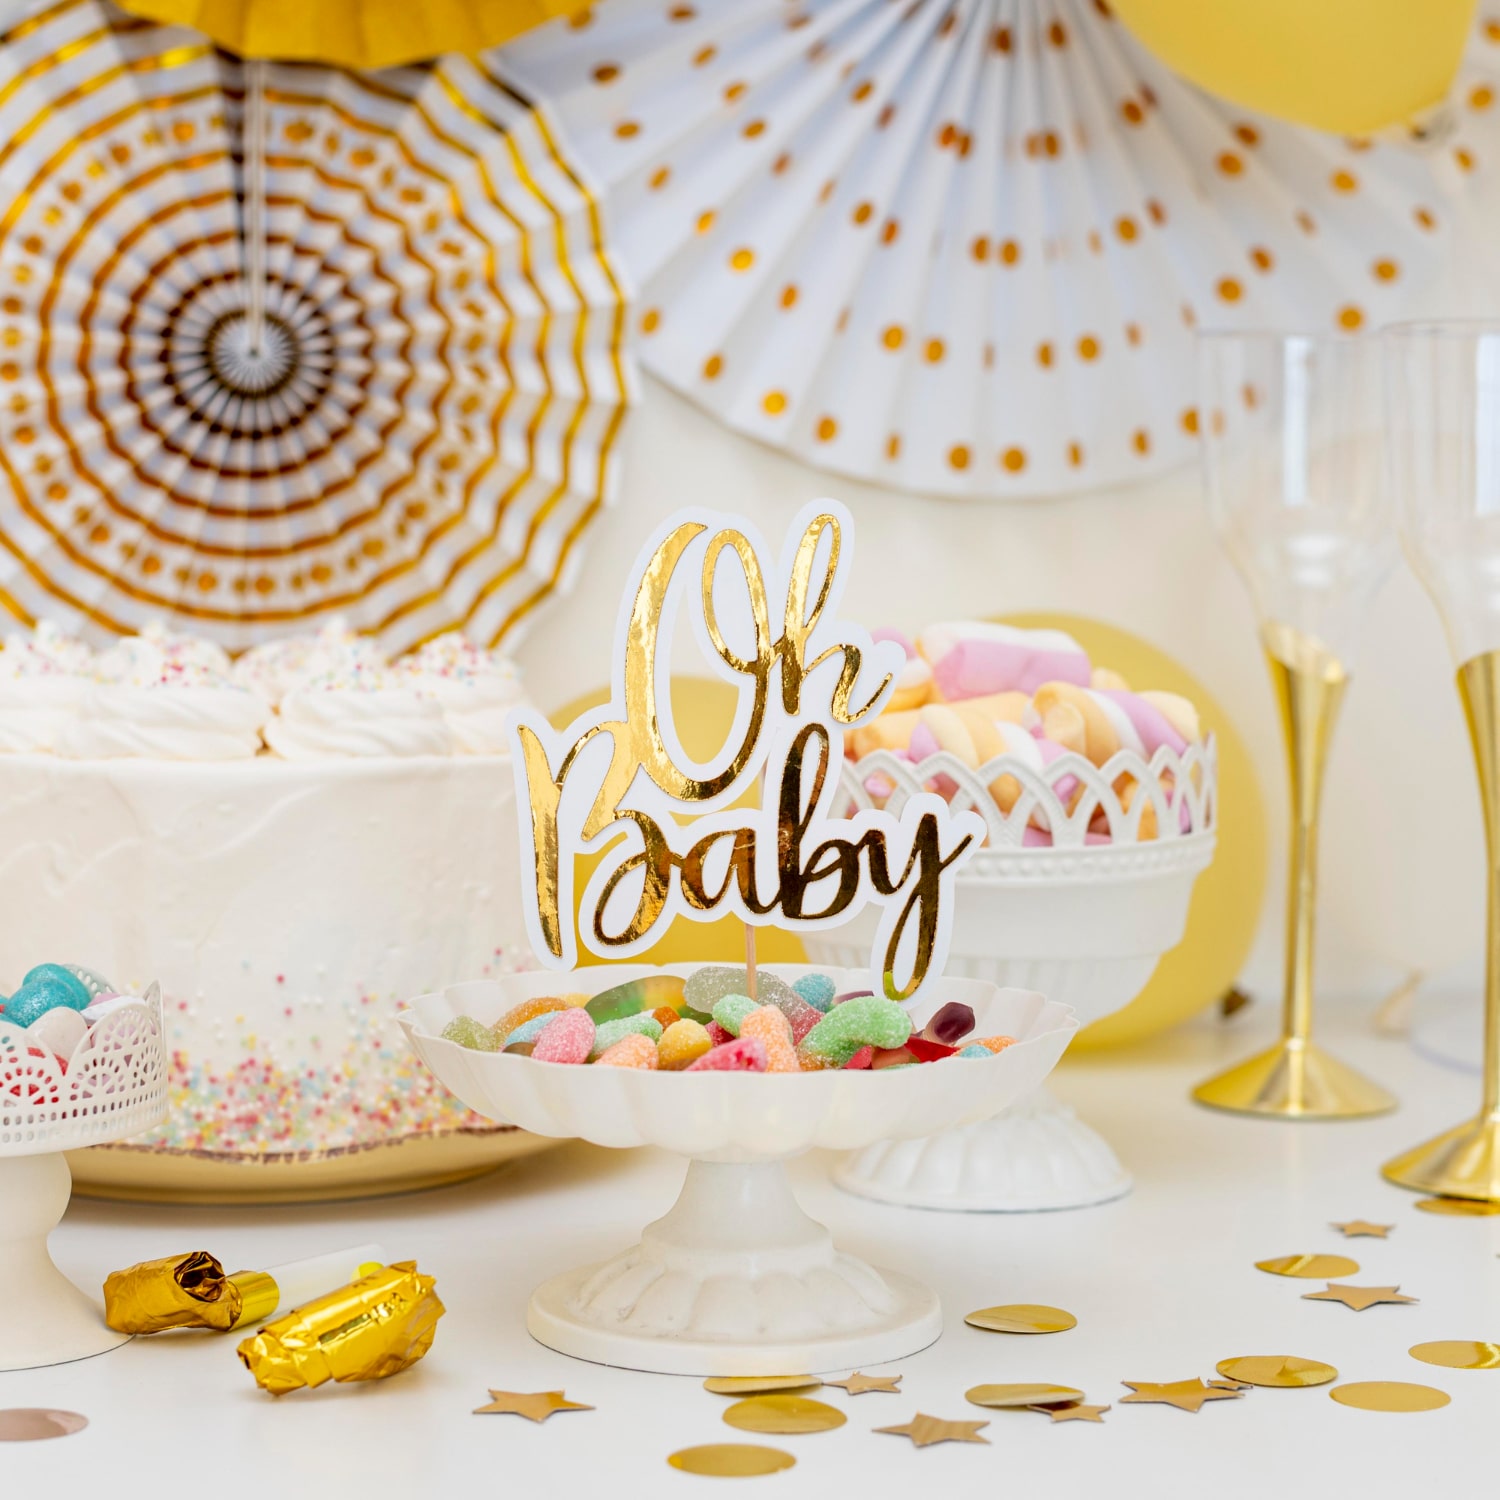 A delightful spread of treats awaits at this Baby Shower! Indulge in a scrumptious cake, delectable cupcakes, and other delightful goodies on a beautifully set table.